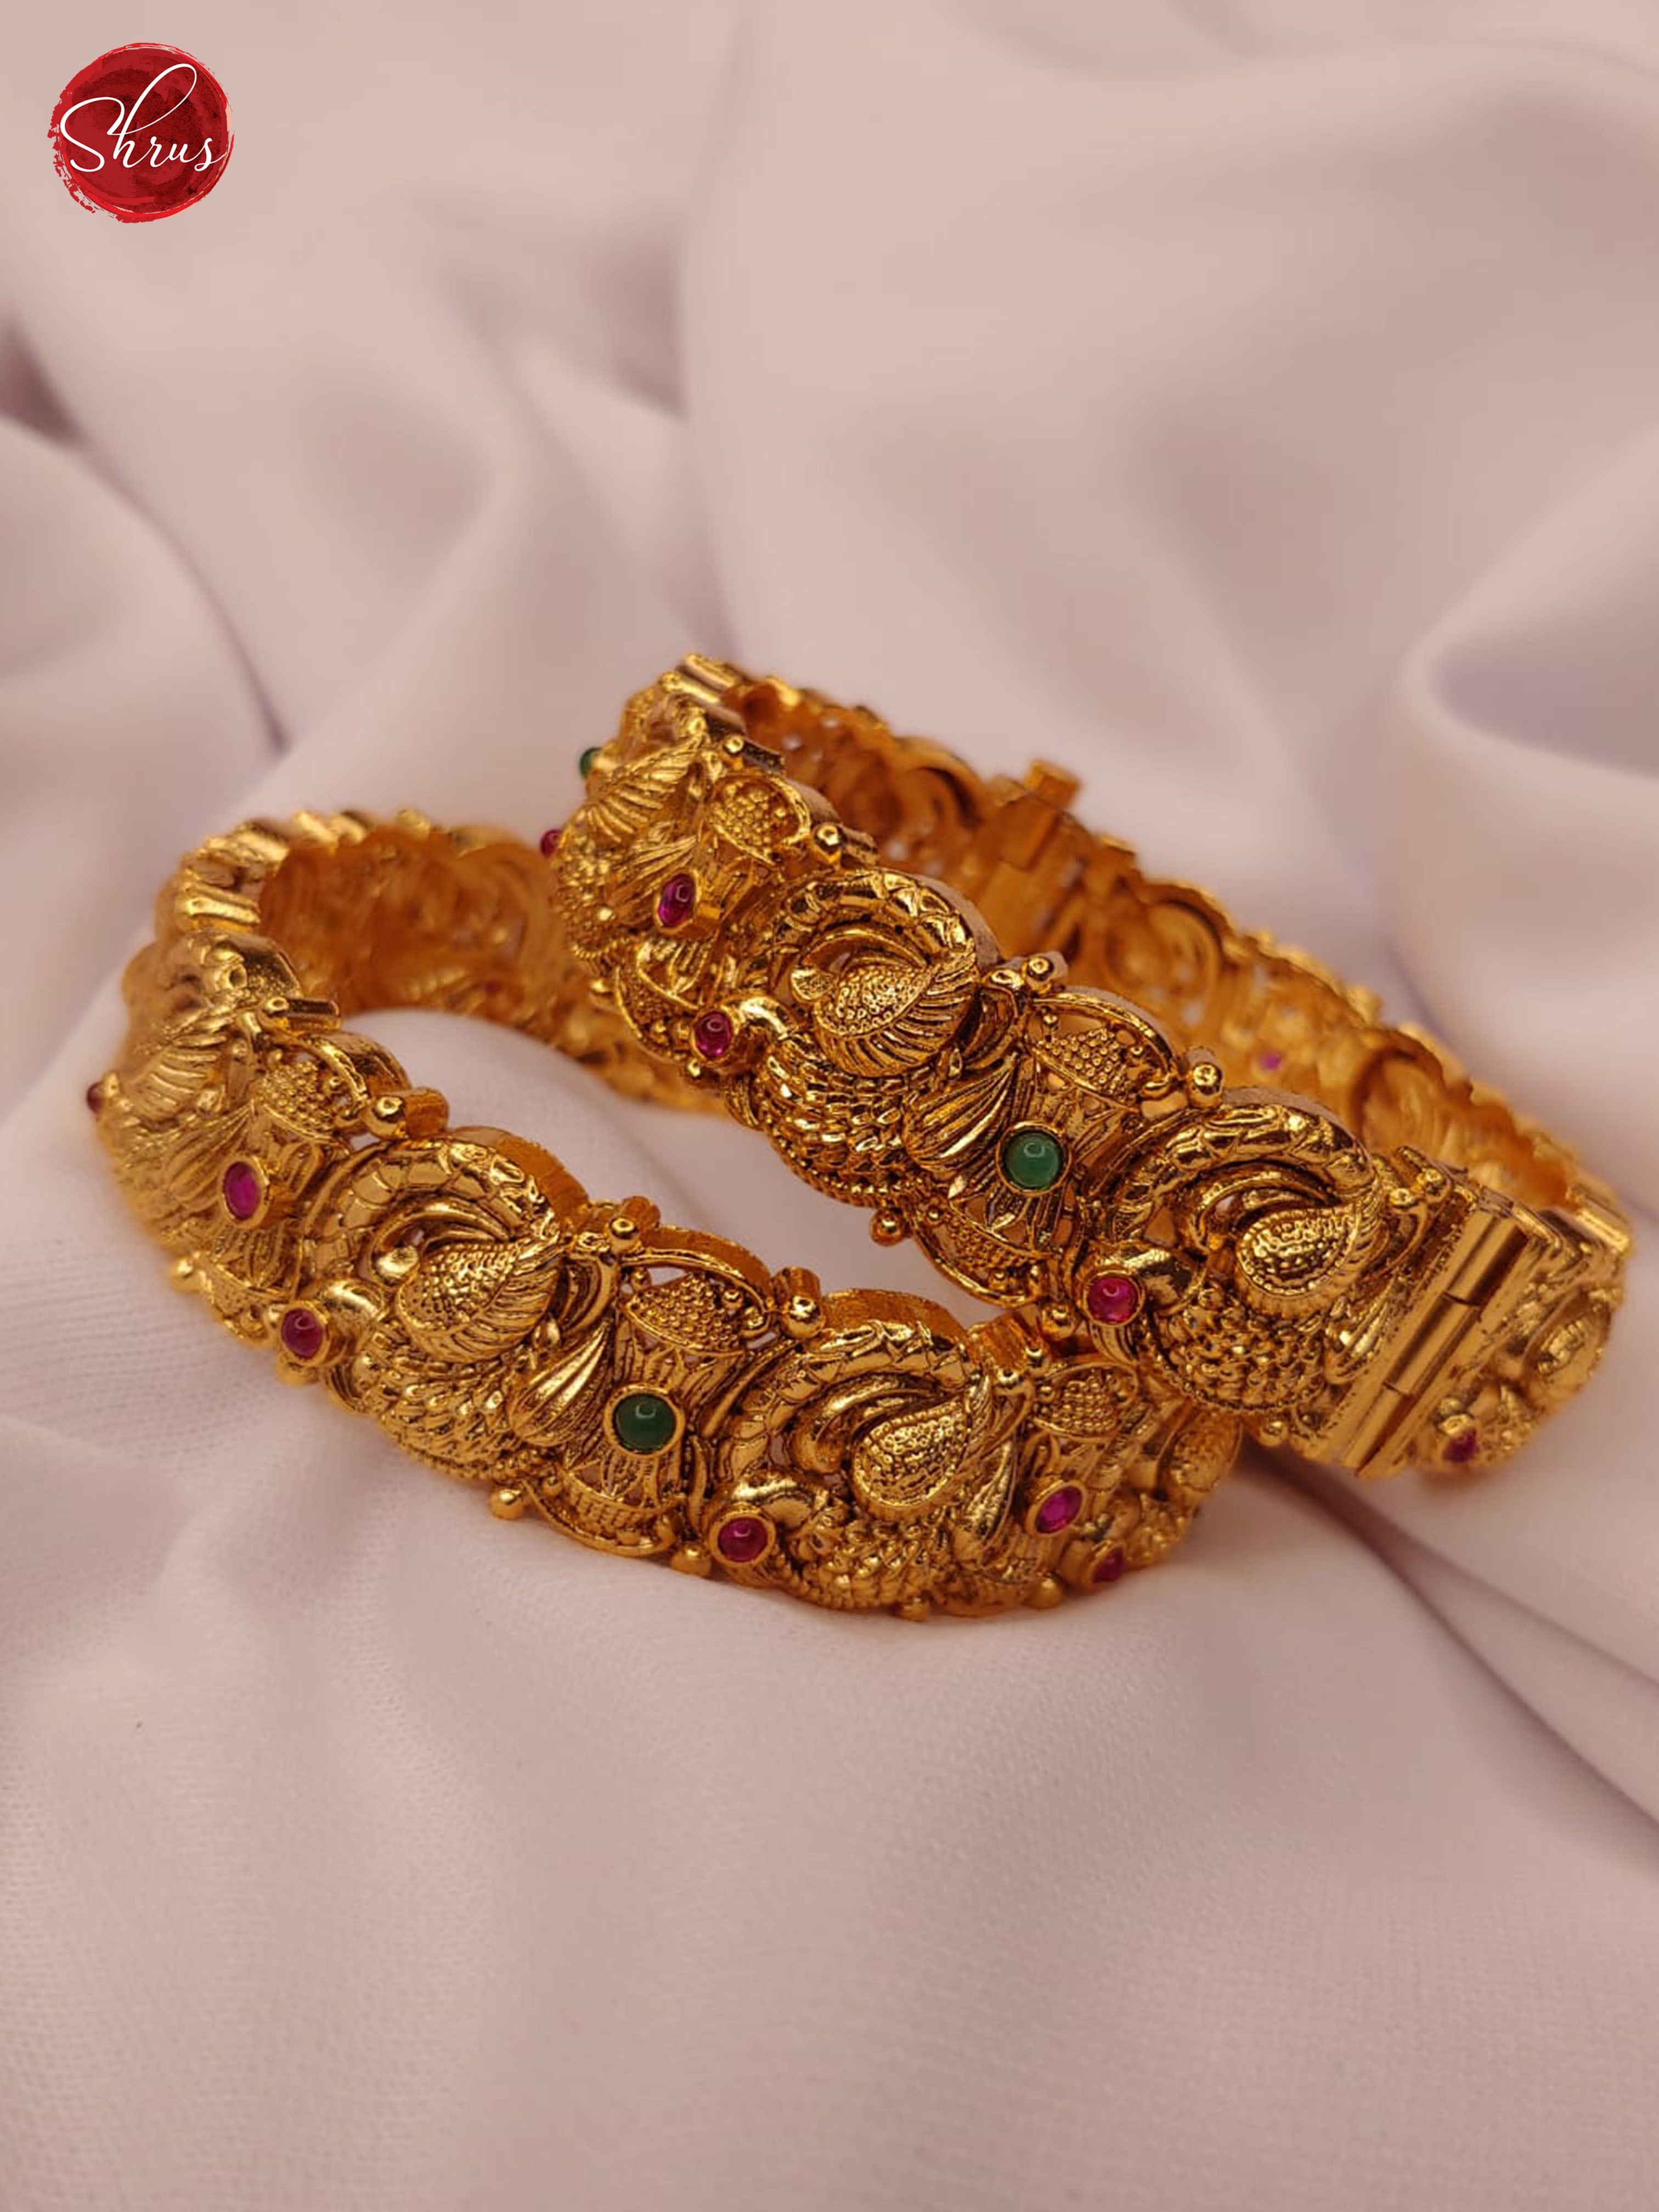 ACCESSORIES - BANGLES (ARTIFICIAL) SIZE - 2.6 - Shop on ShrusEternity.com